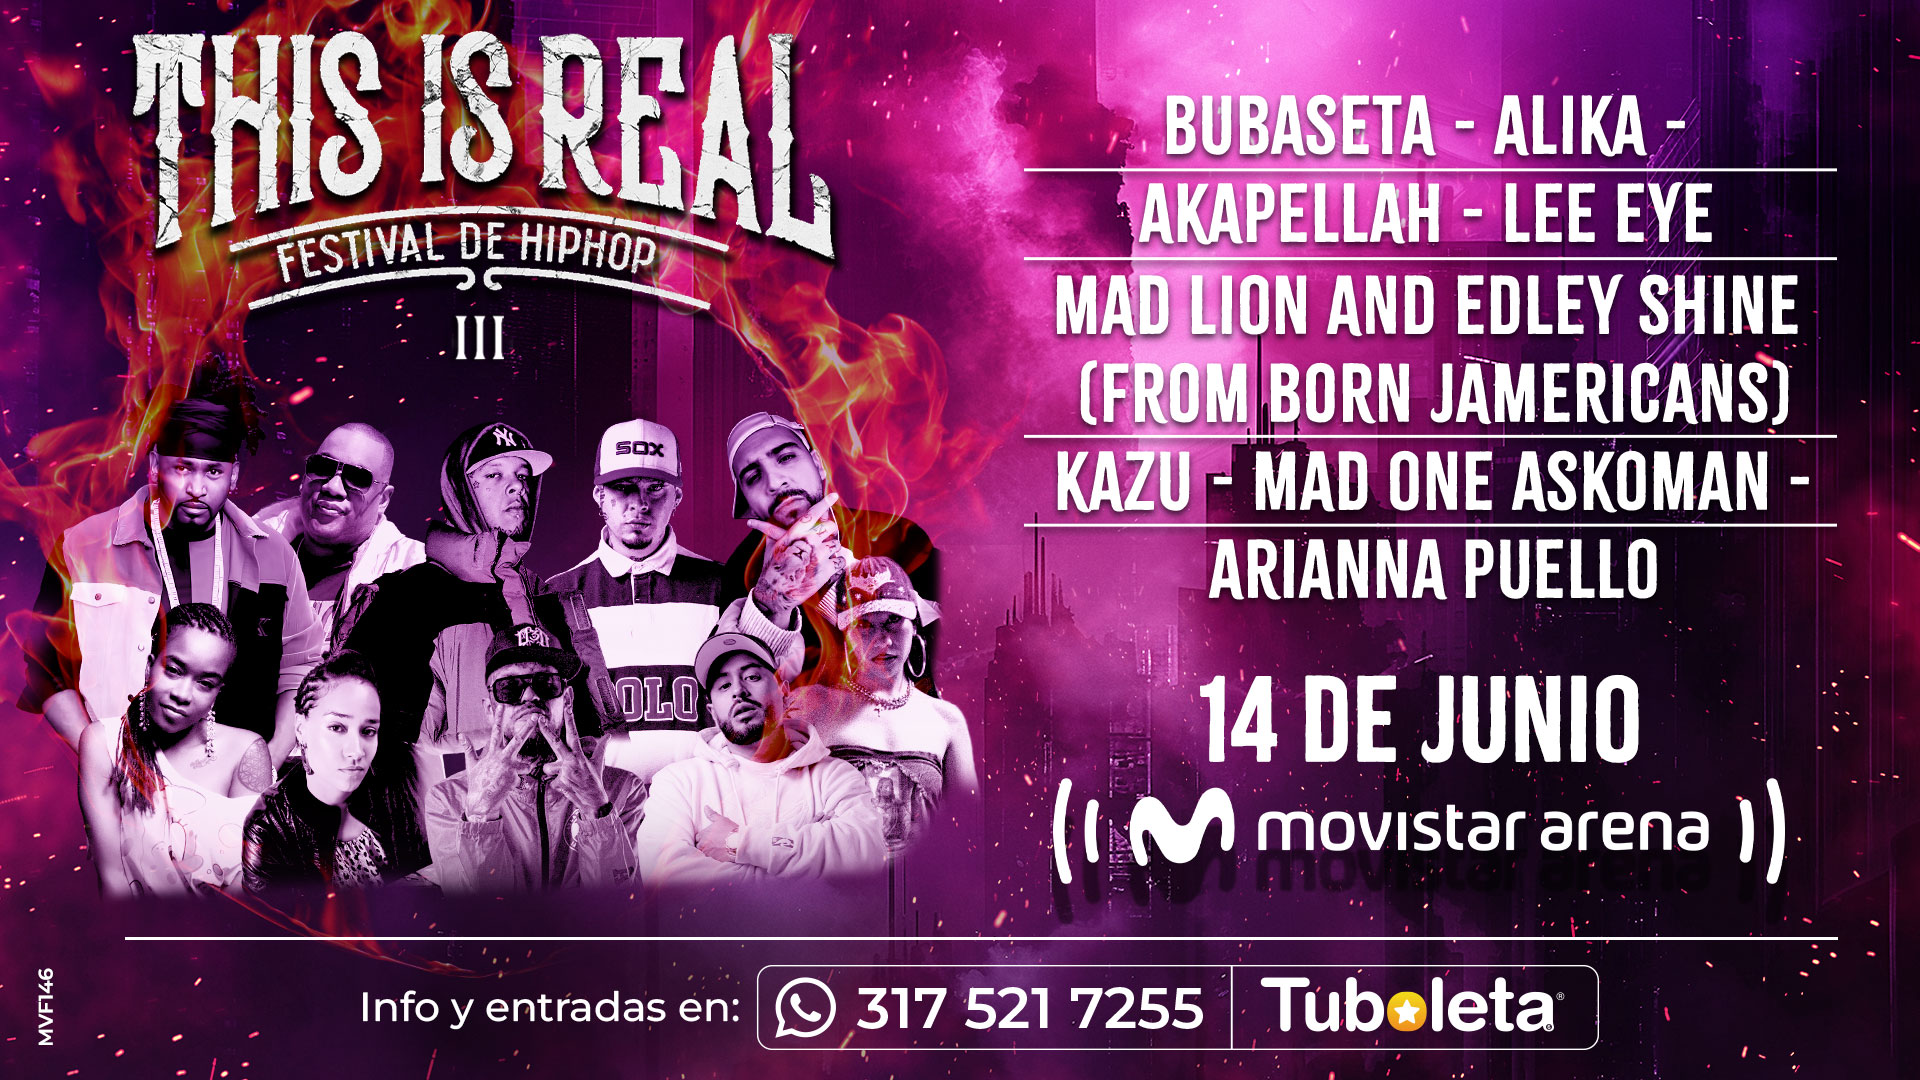 this is real festival de hip hop latino iii 2